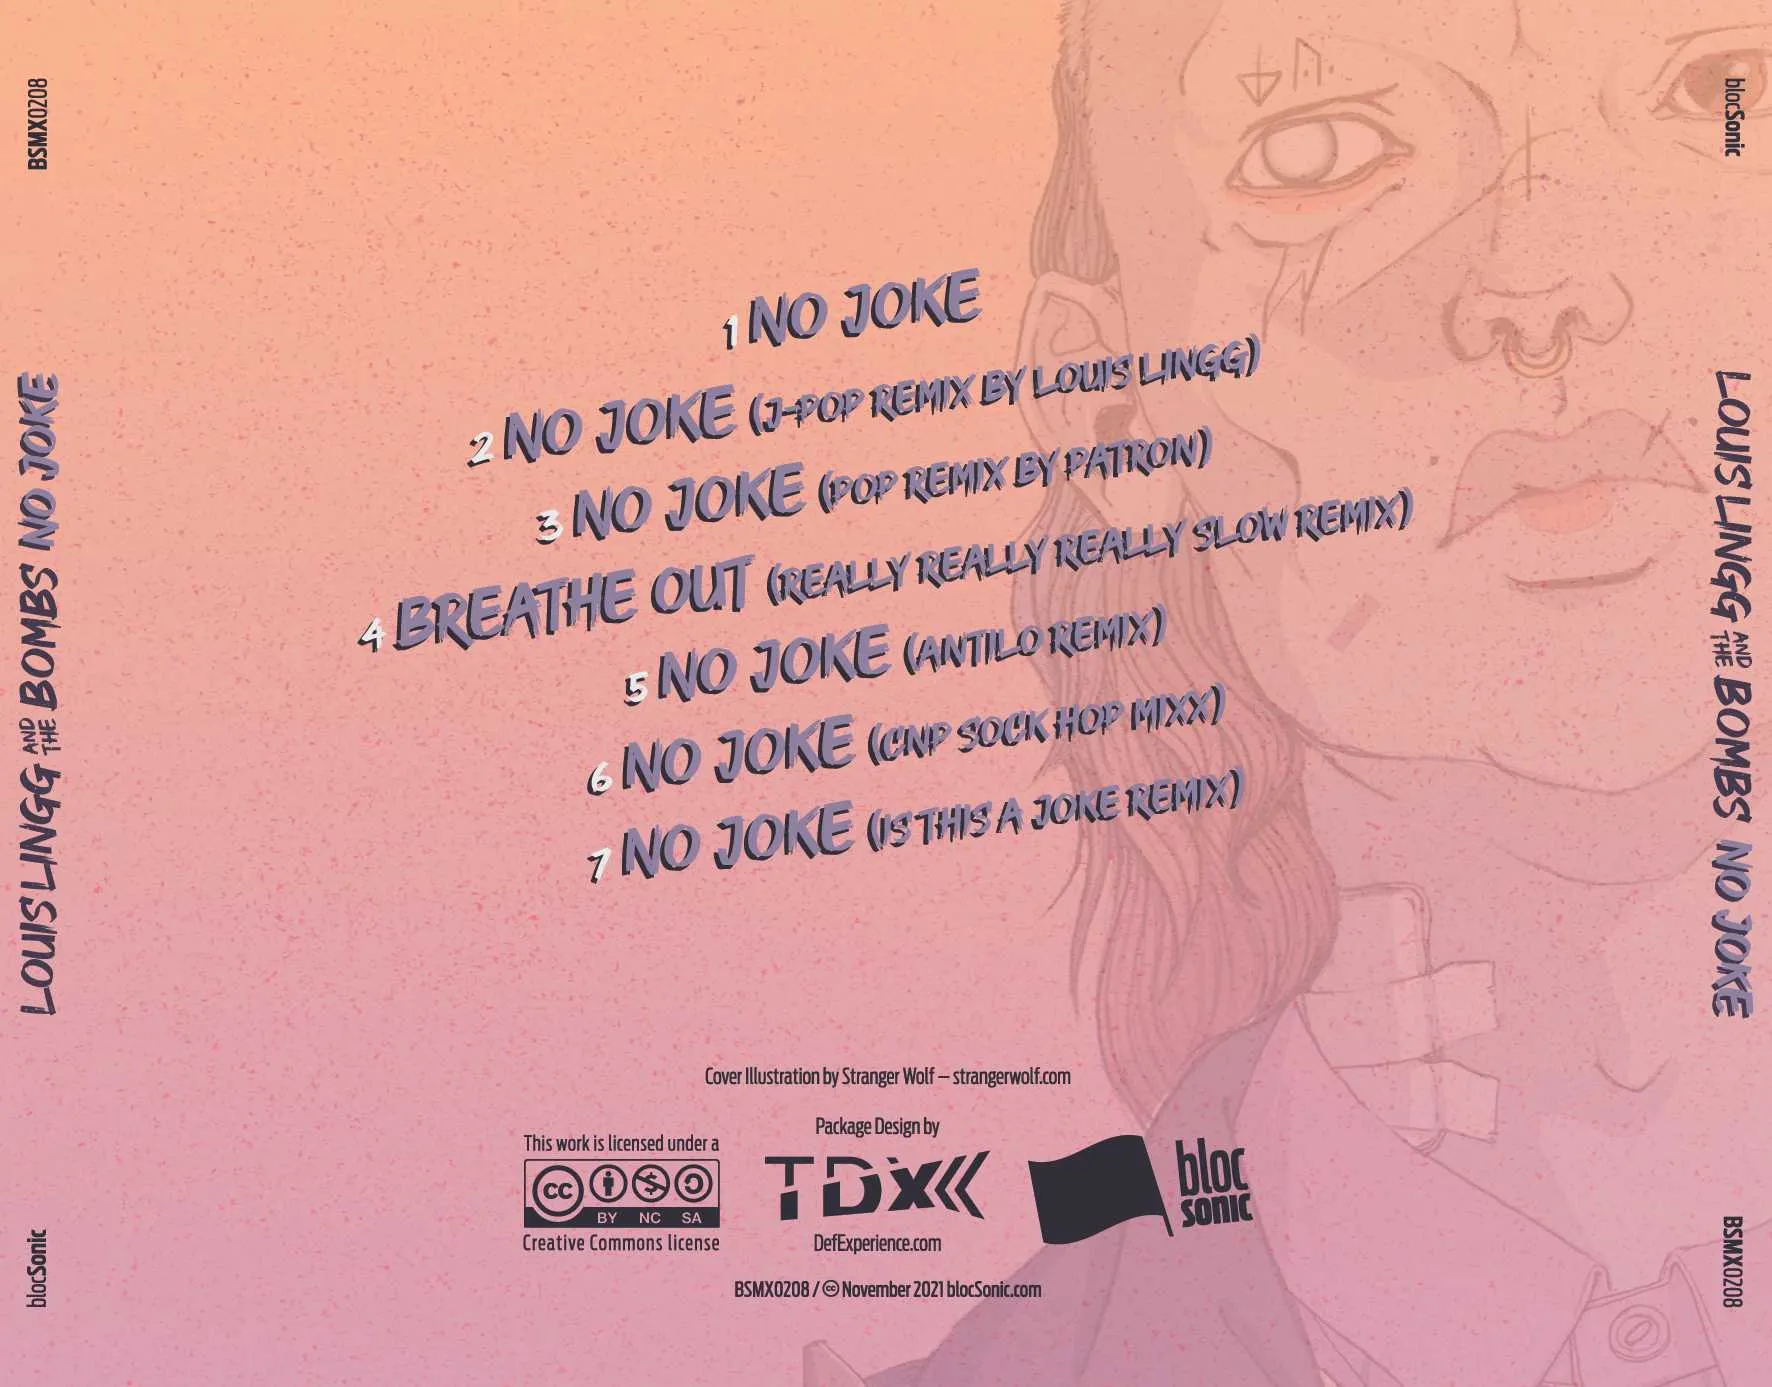 Album traycard for “No Joke” by Louis Lingg and The Bombs